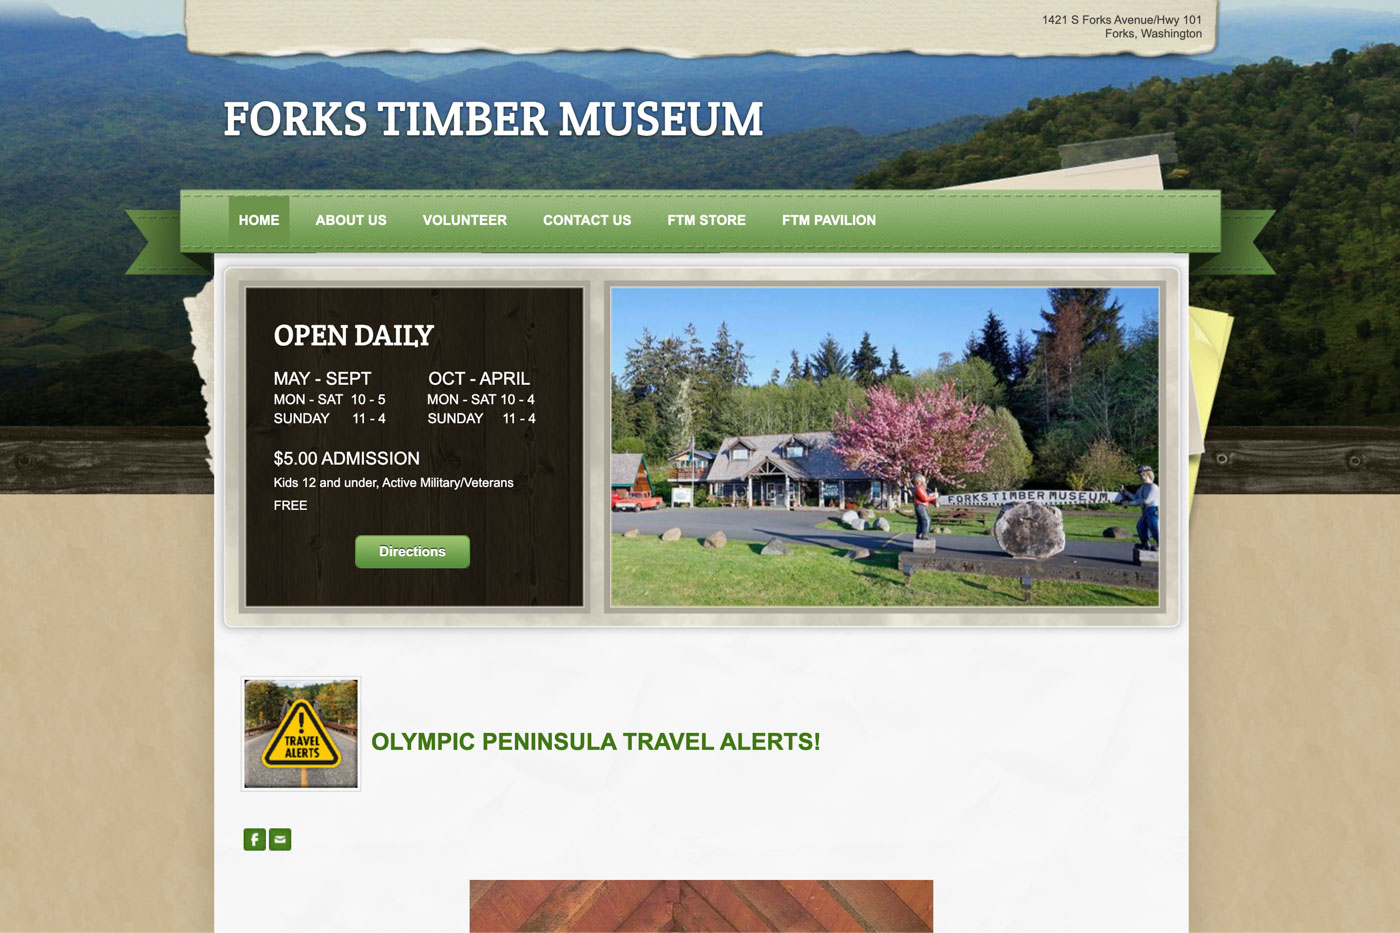 The homepage of the Forks Timber Museum website.